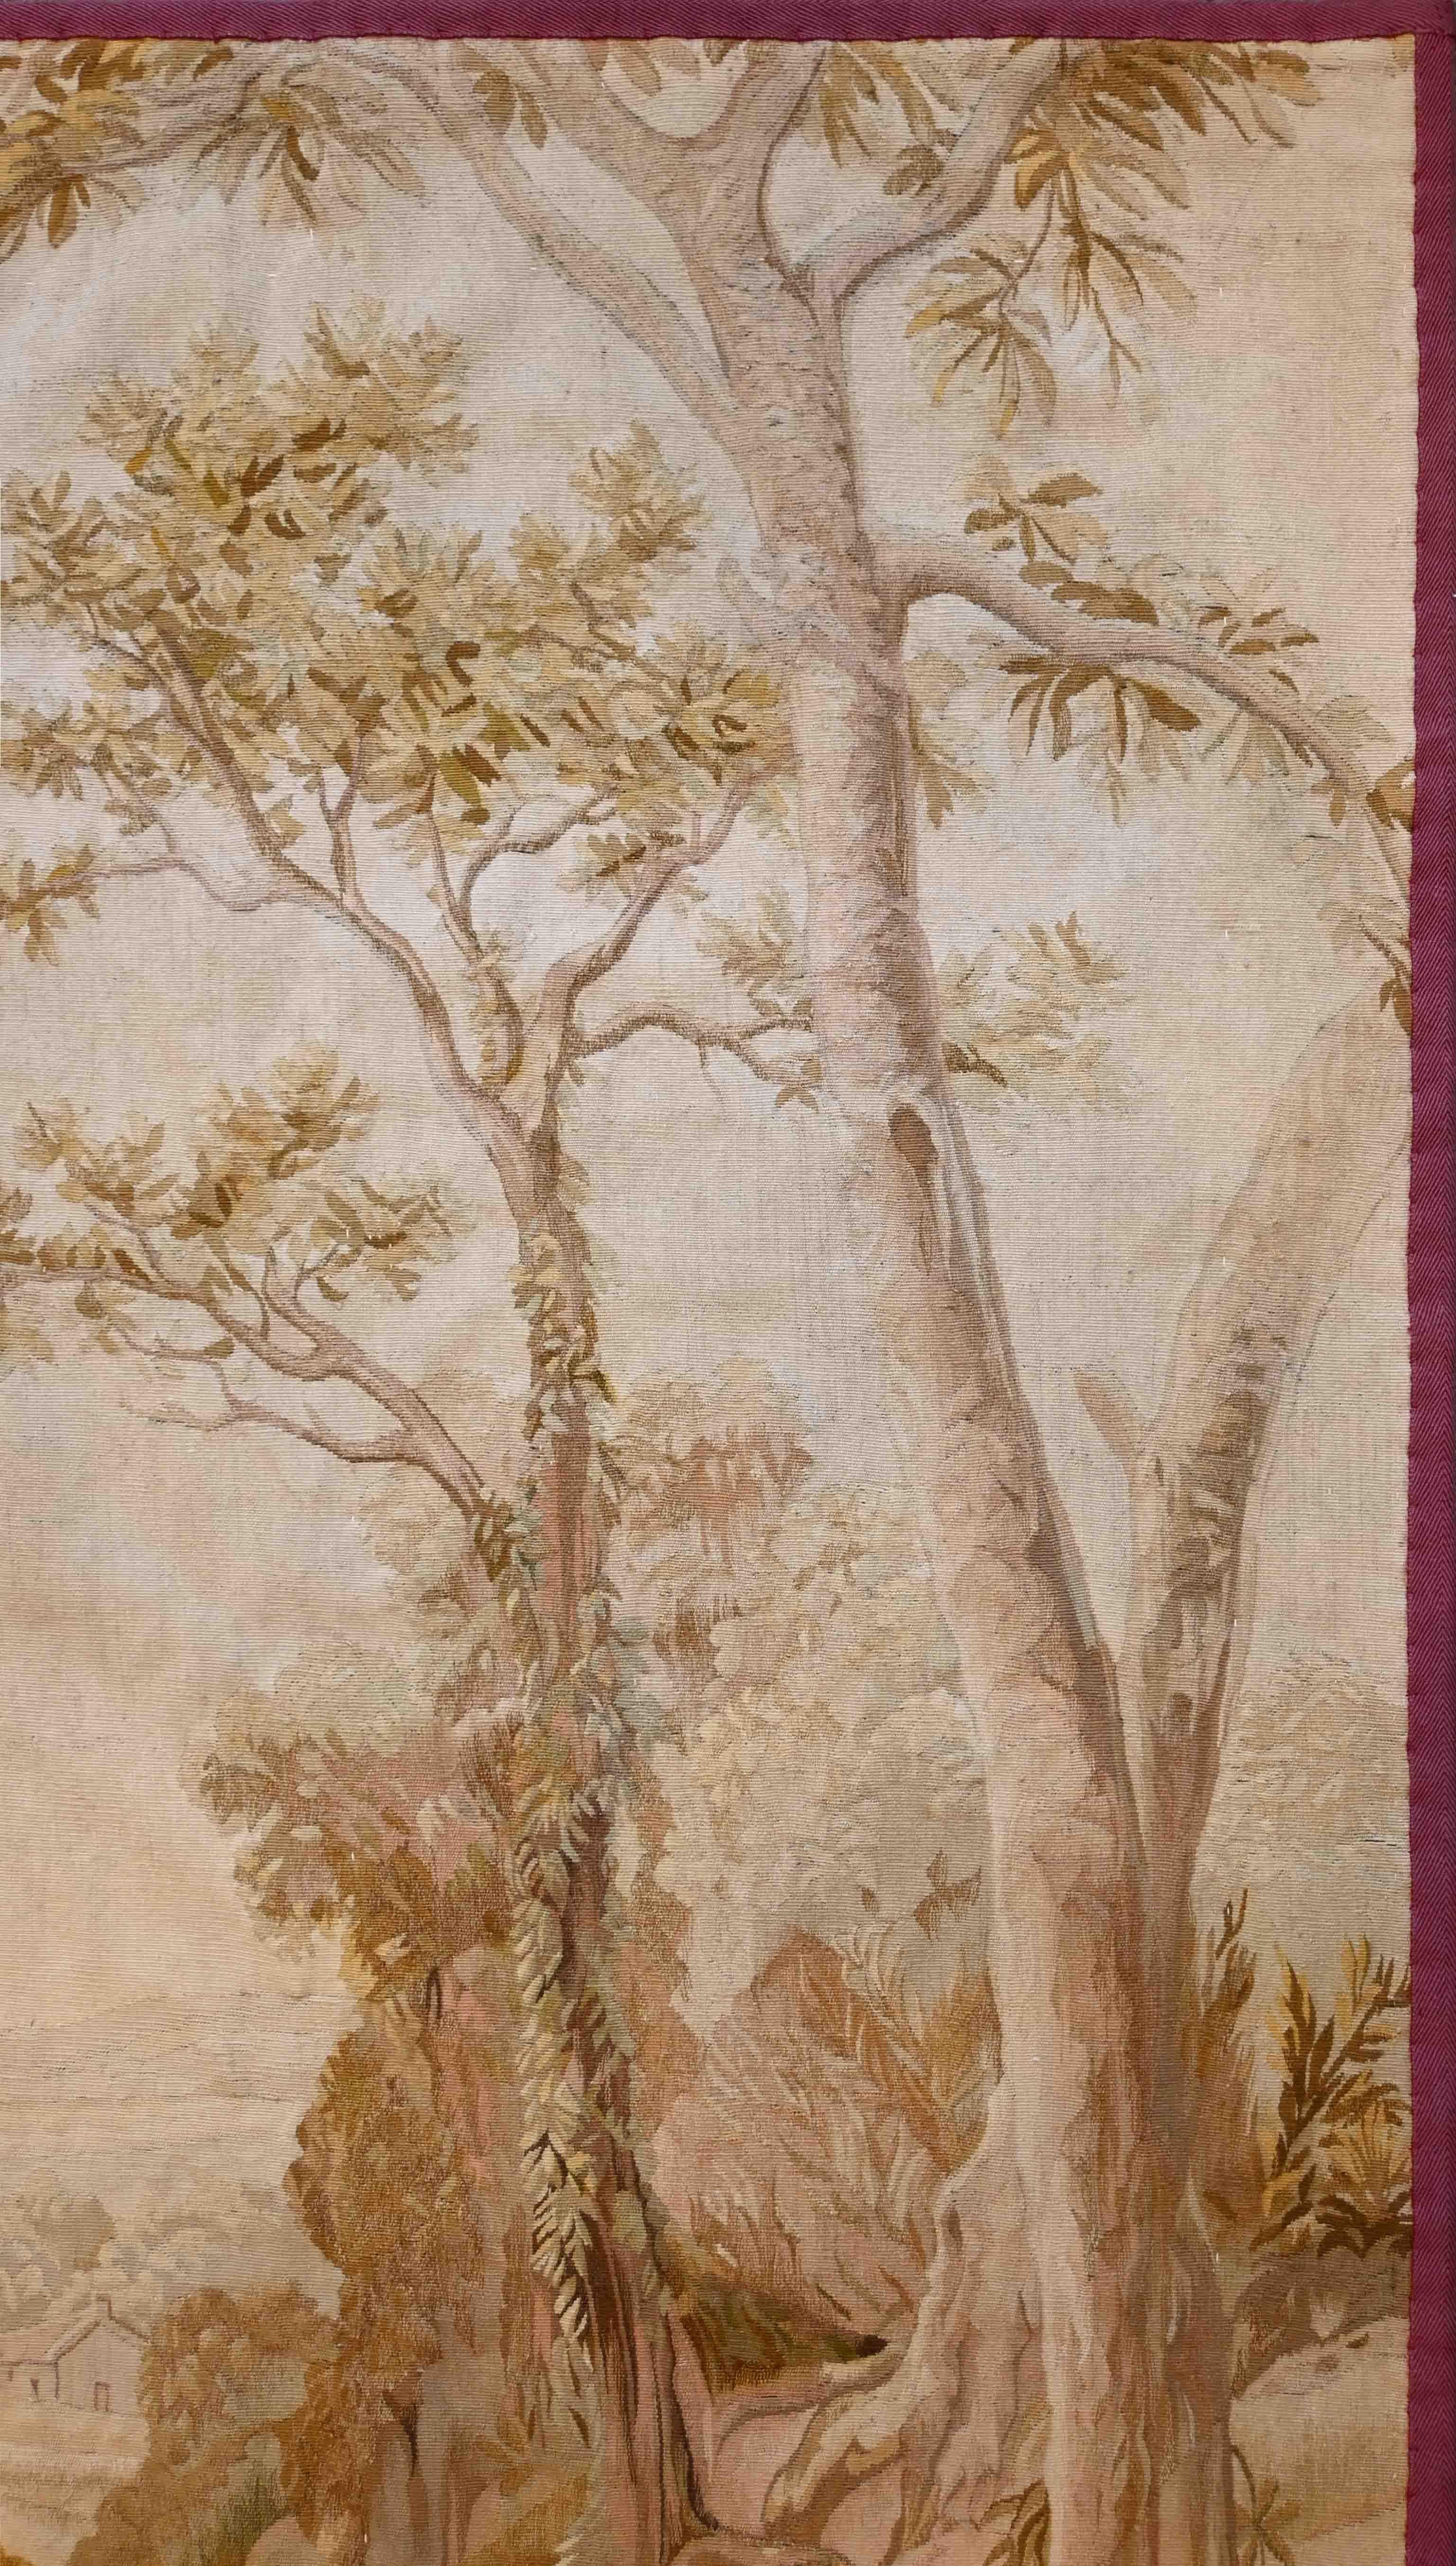 Hand-Woven Aubusson tapestry of 19th century - N° 1248 For Sale